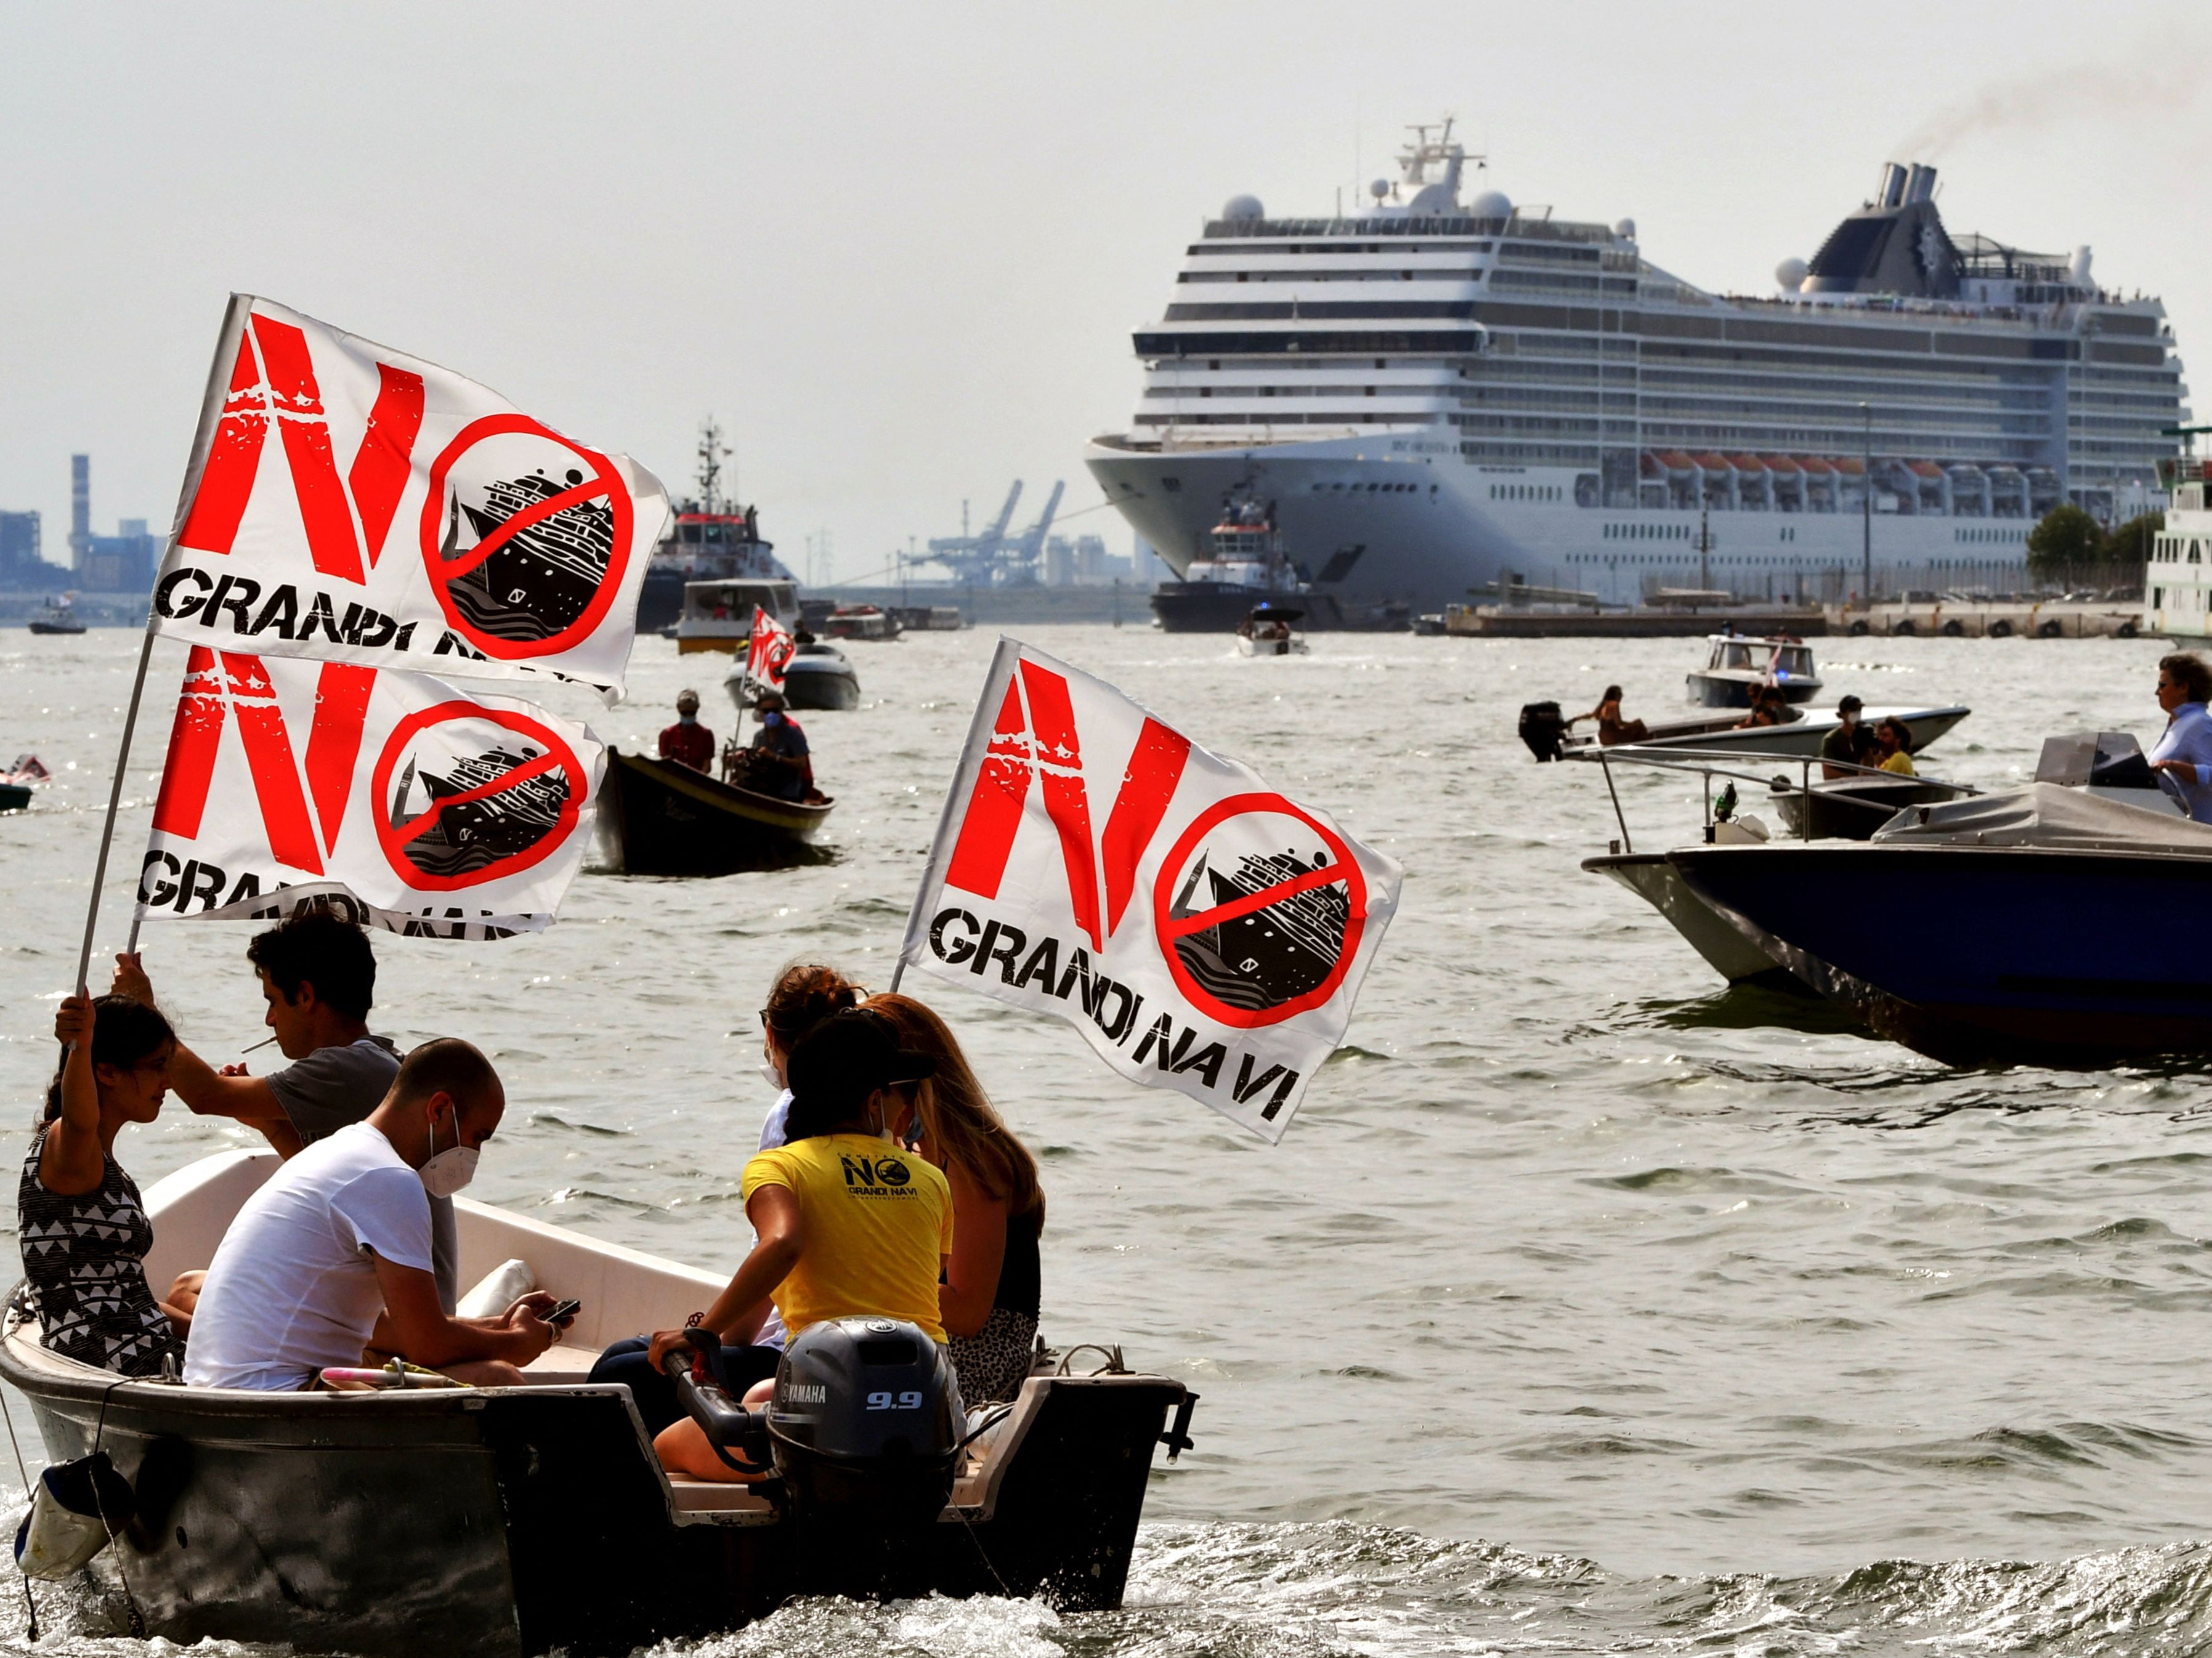 Environmental protesters demonstrate against the return of cruise ships to the lagoon city